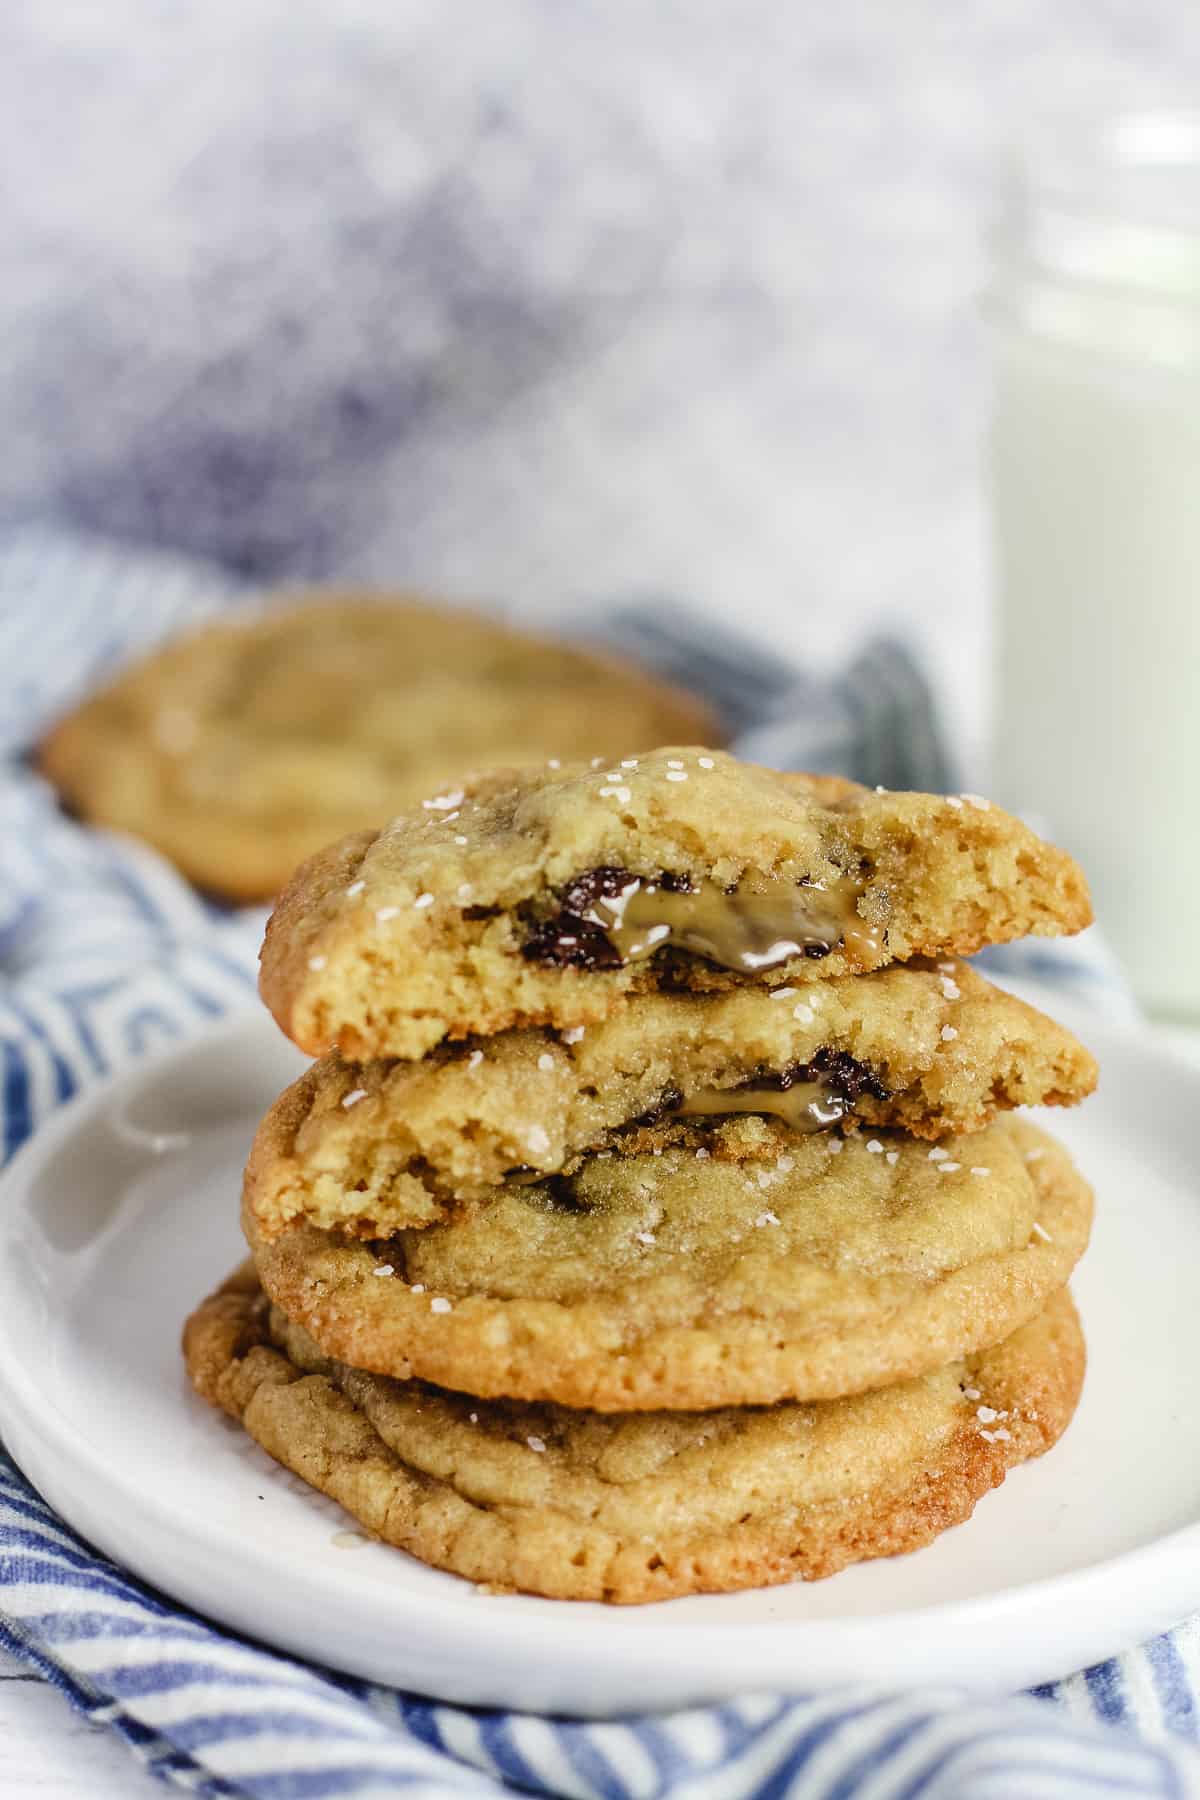 A stack of caramel stuffed cookies, showing the insides.